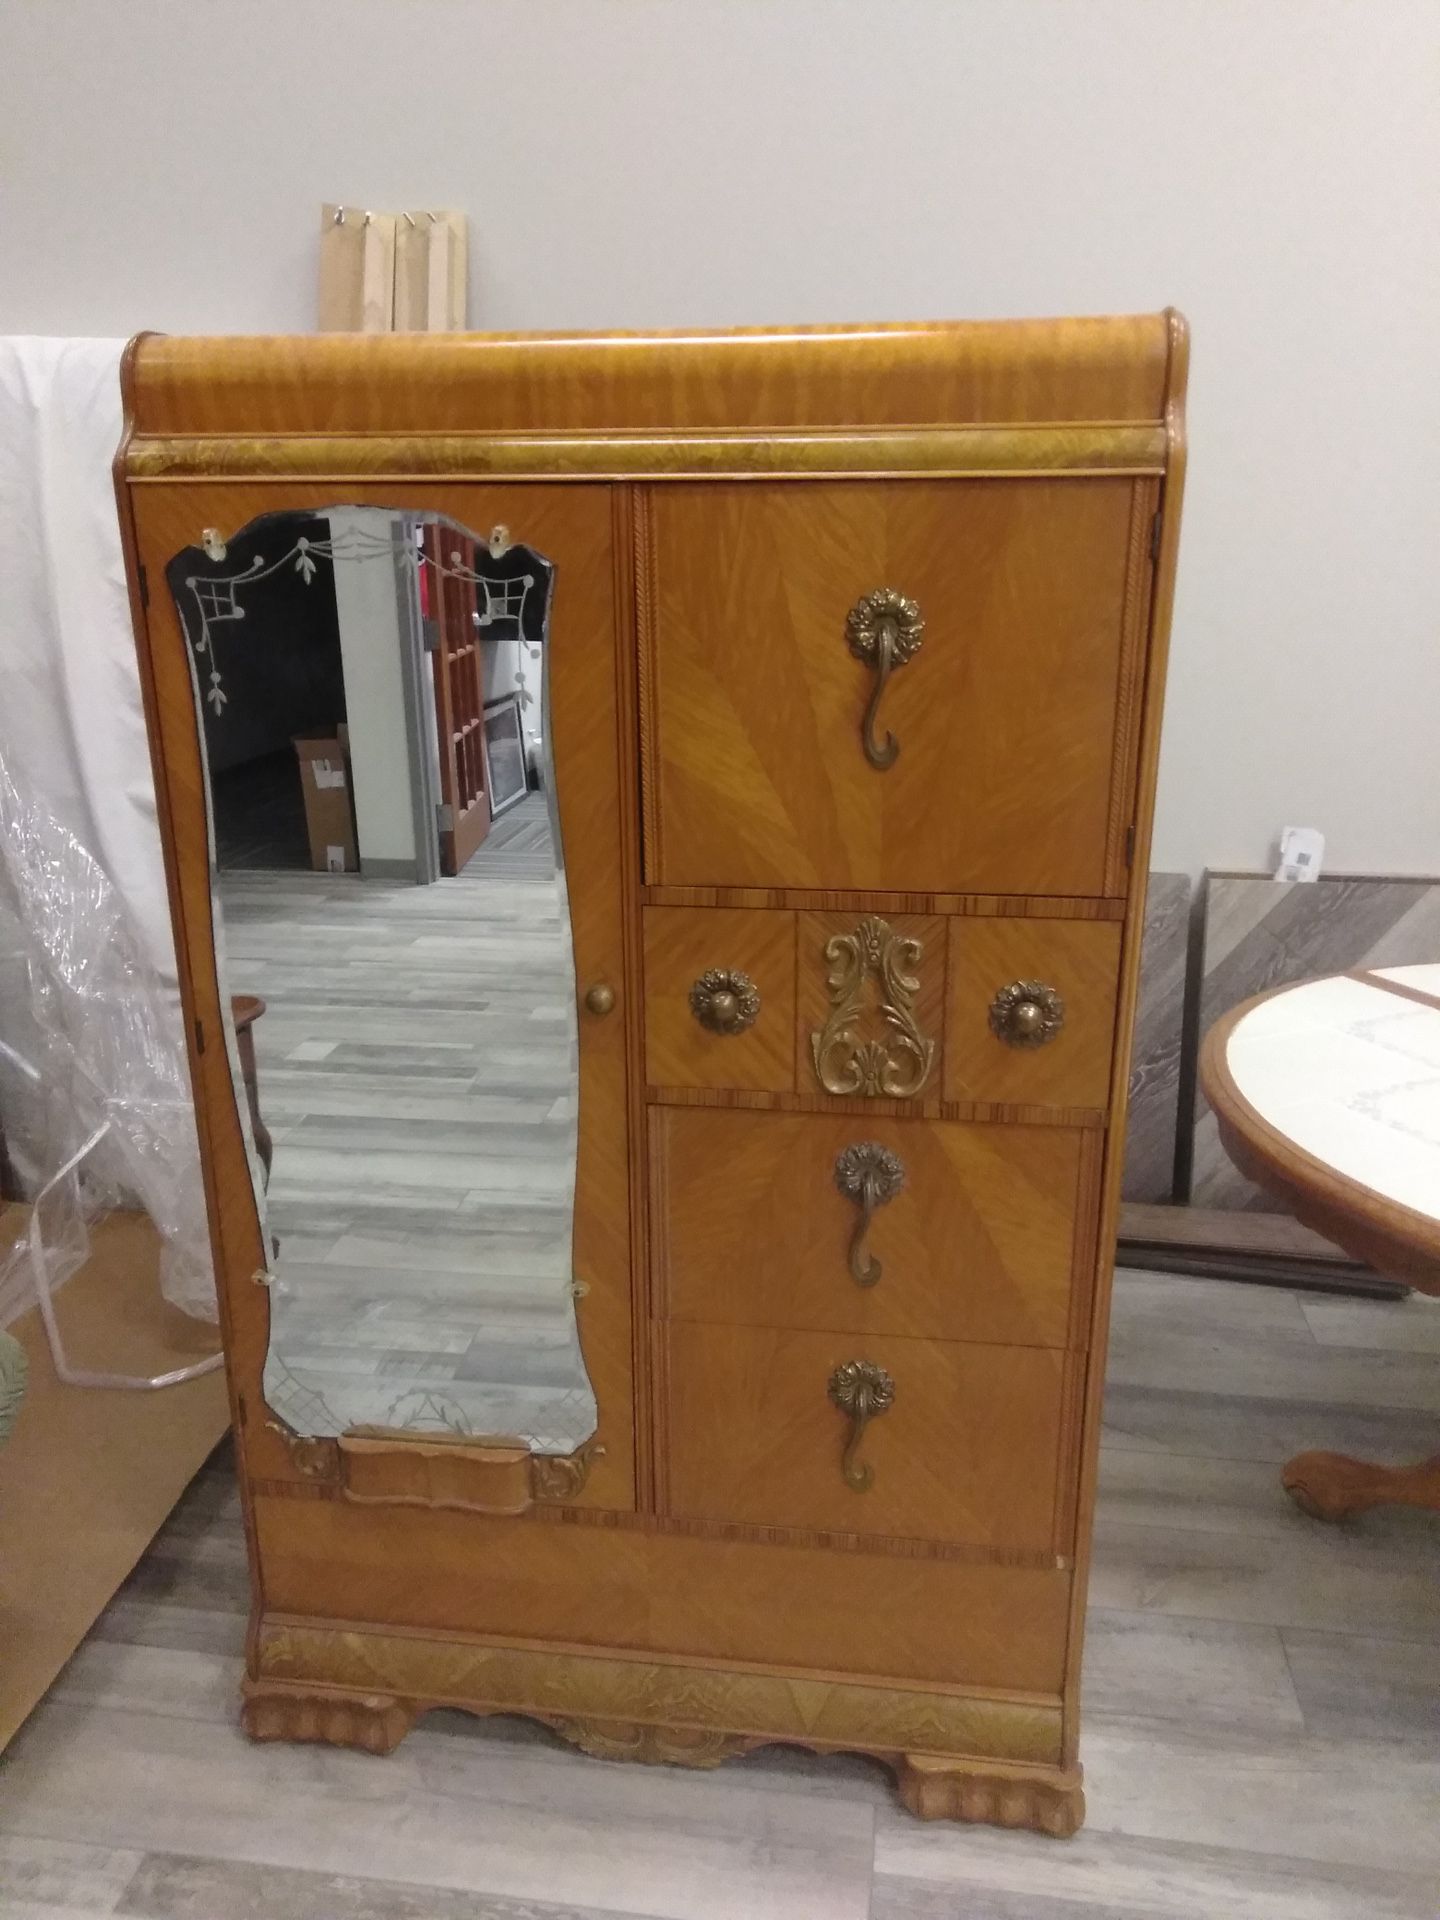 Antique armoire in great condition